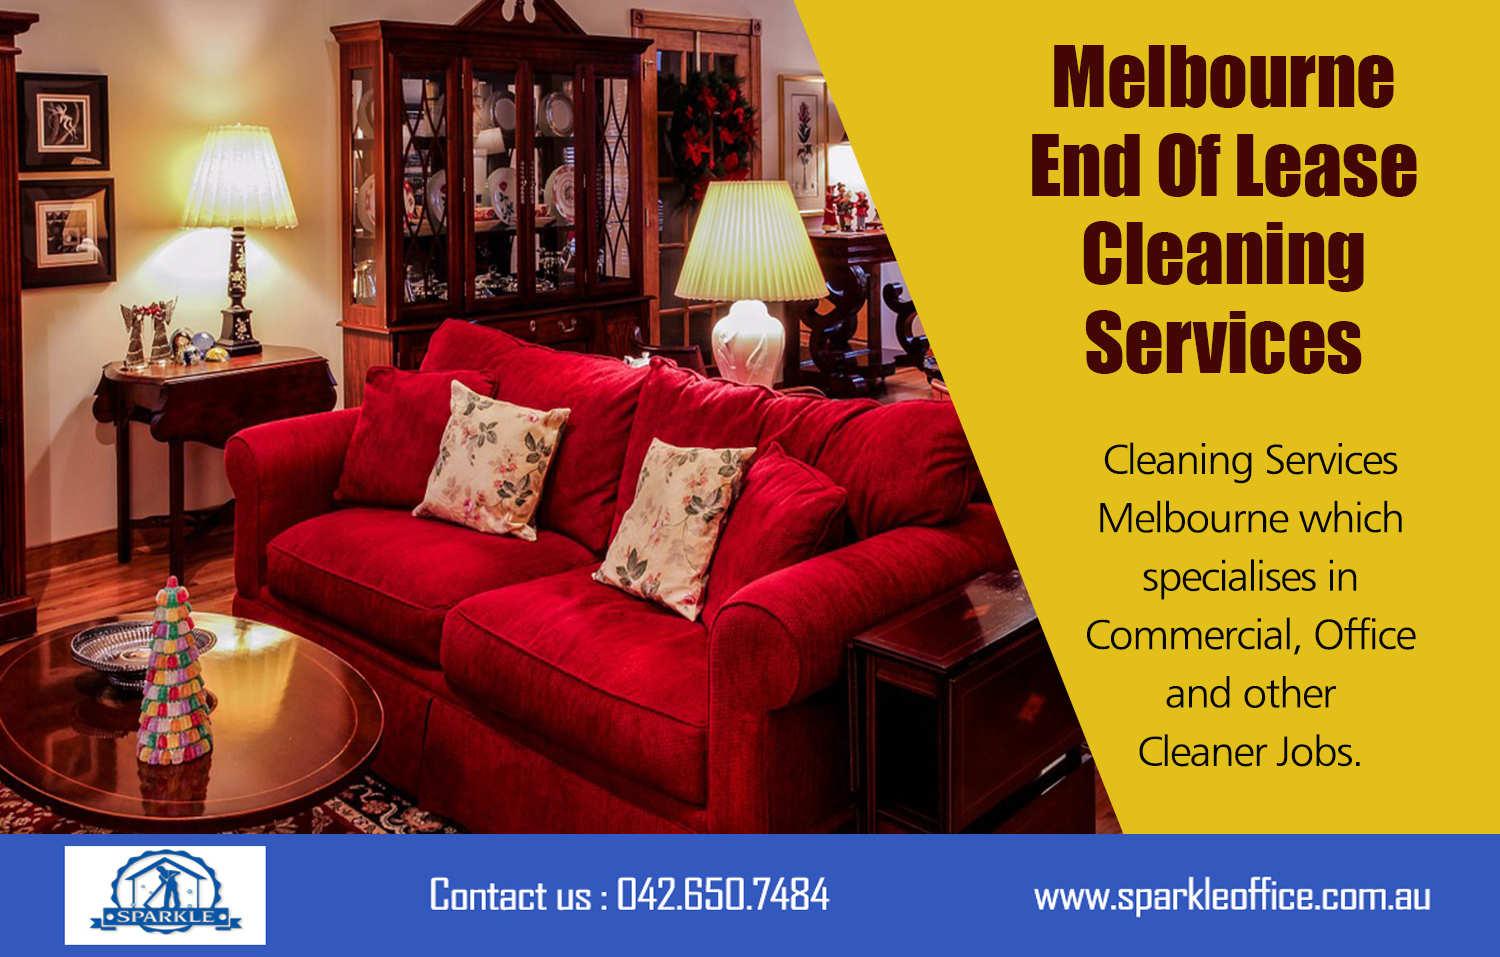 Melbourne End Of Lease Cleaning Services| Call Us - 042 650 7484  | sparkleoffice.com.au